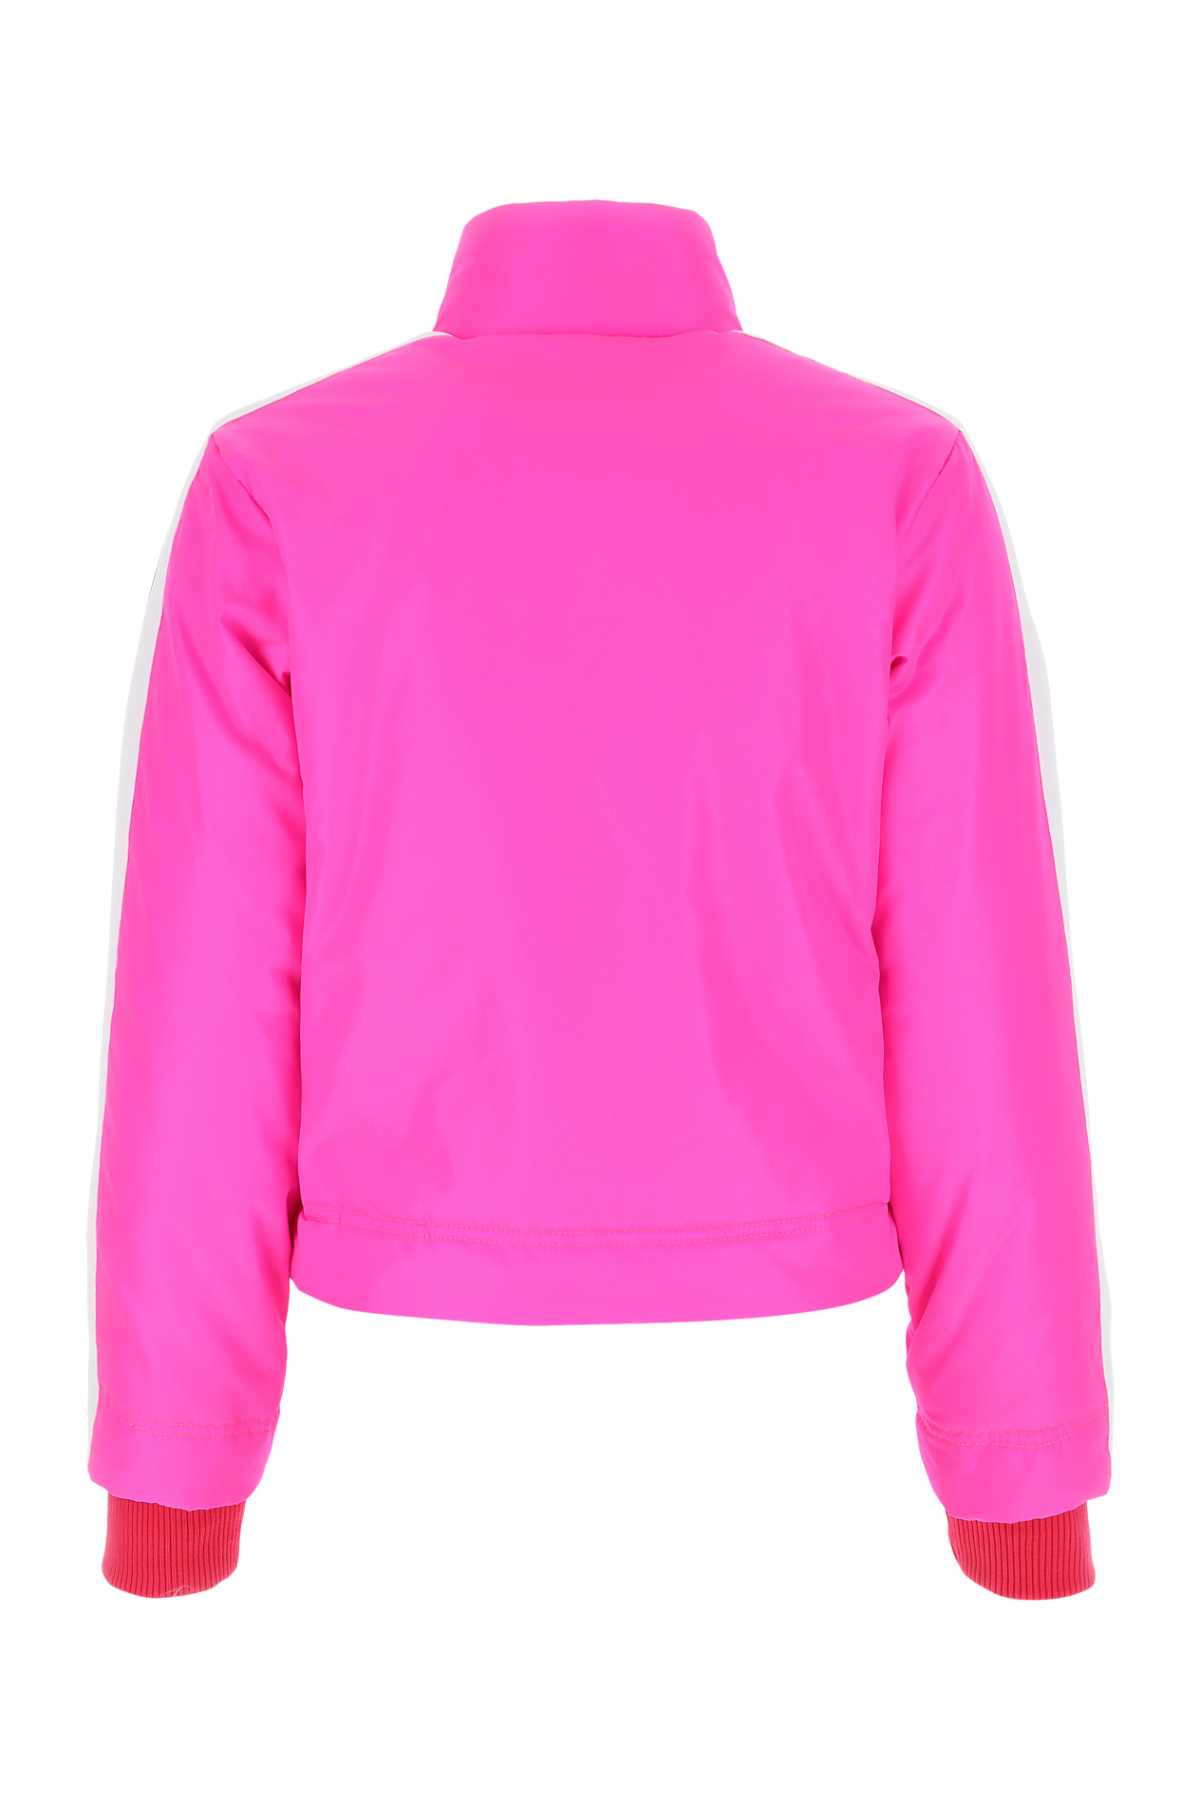 Palm Angels Fluo Pink Nylon Jacket In Pinkwhite